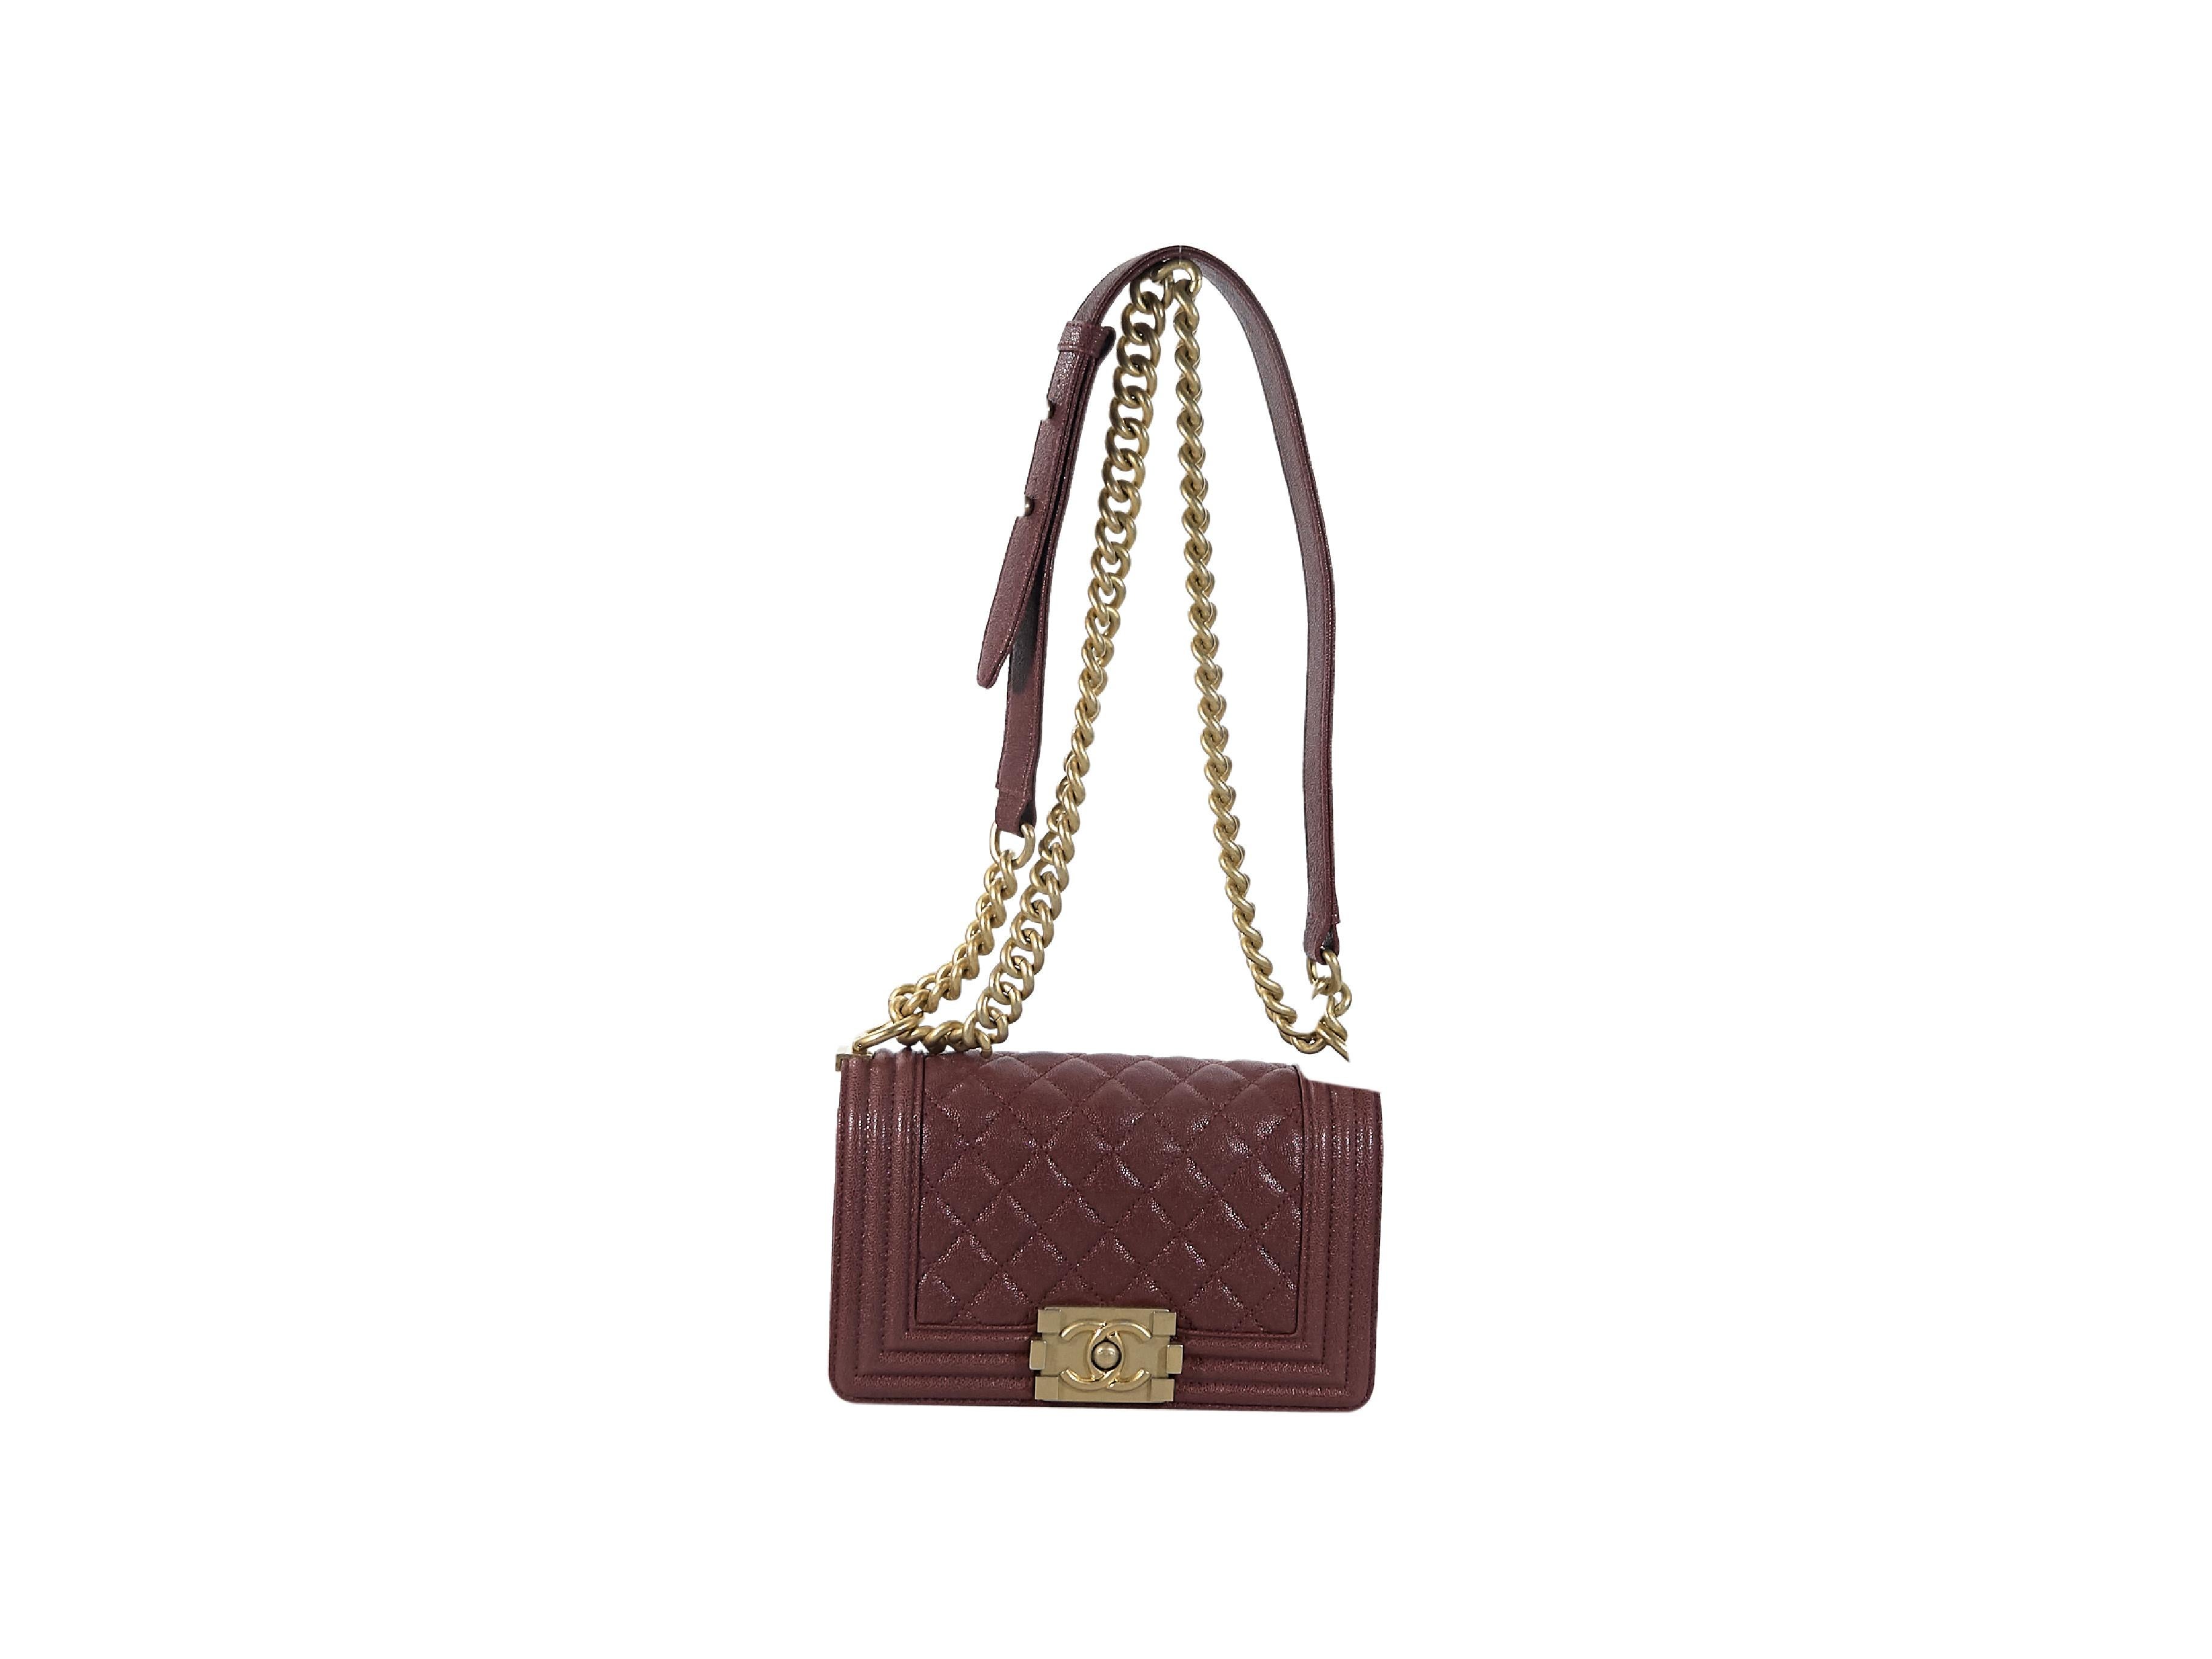 Product details:  Burgundy quilted caviar leather Boy bag by Chanel.  From 2018.  Adjustable leather and chain crossbody strap.  Front flap with push-lock closure.  Lined interior with inner slide pocket.  Goldtone hardware.  Authenticity card